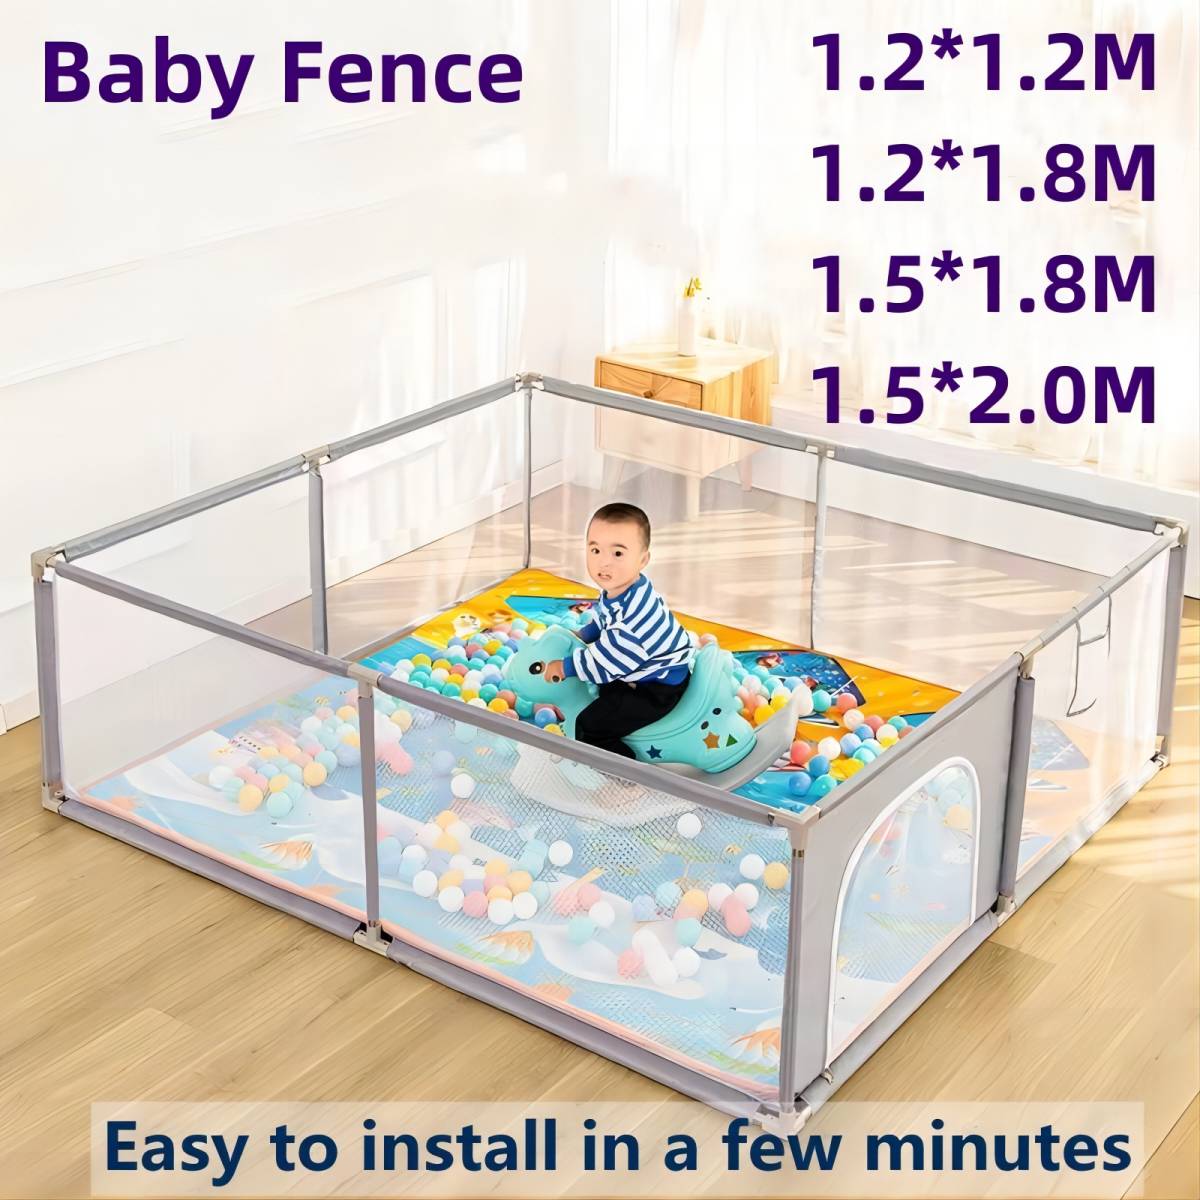 Baby Fence Fabric Kids Safety Playpen Play fence Rectangle/Square Kids Play House Playground